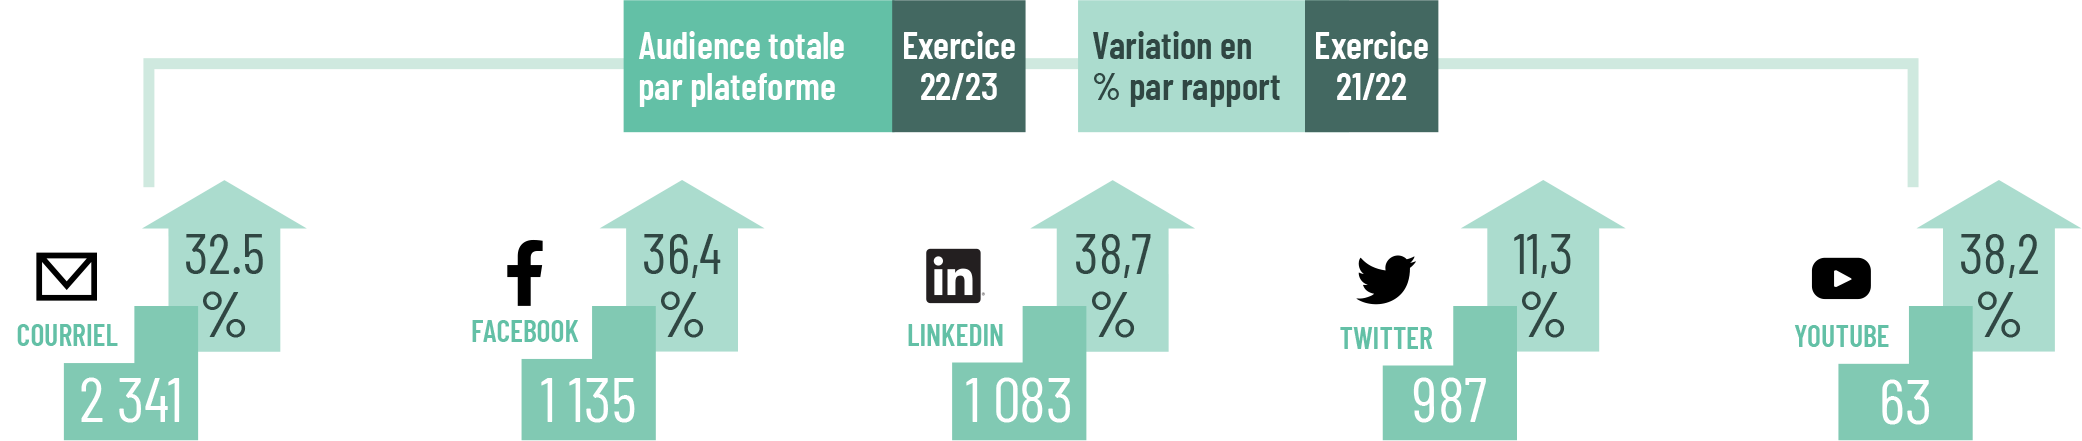 Total Audience totale par plateforme – FY22/23 (% change compared to FY 21-22) Email: 2, 341 (+32.5%) Facebook:1,135(+36.4%) LinkedIn:1,083(+38.7%) Twitter:987(+11.3%) Youtube:63(+38.2%)